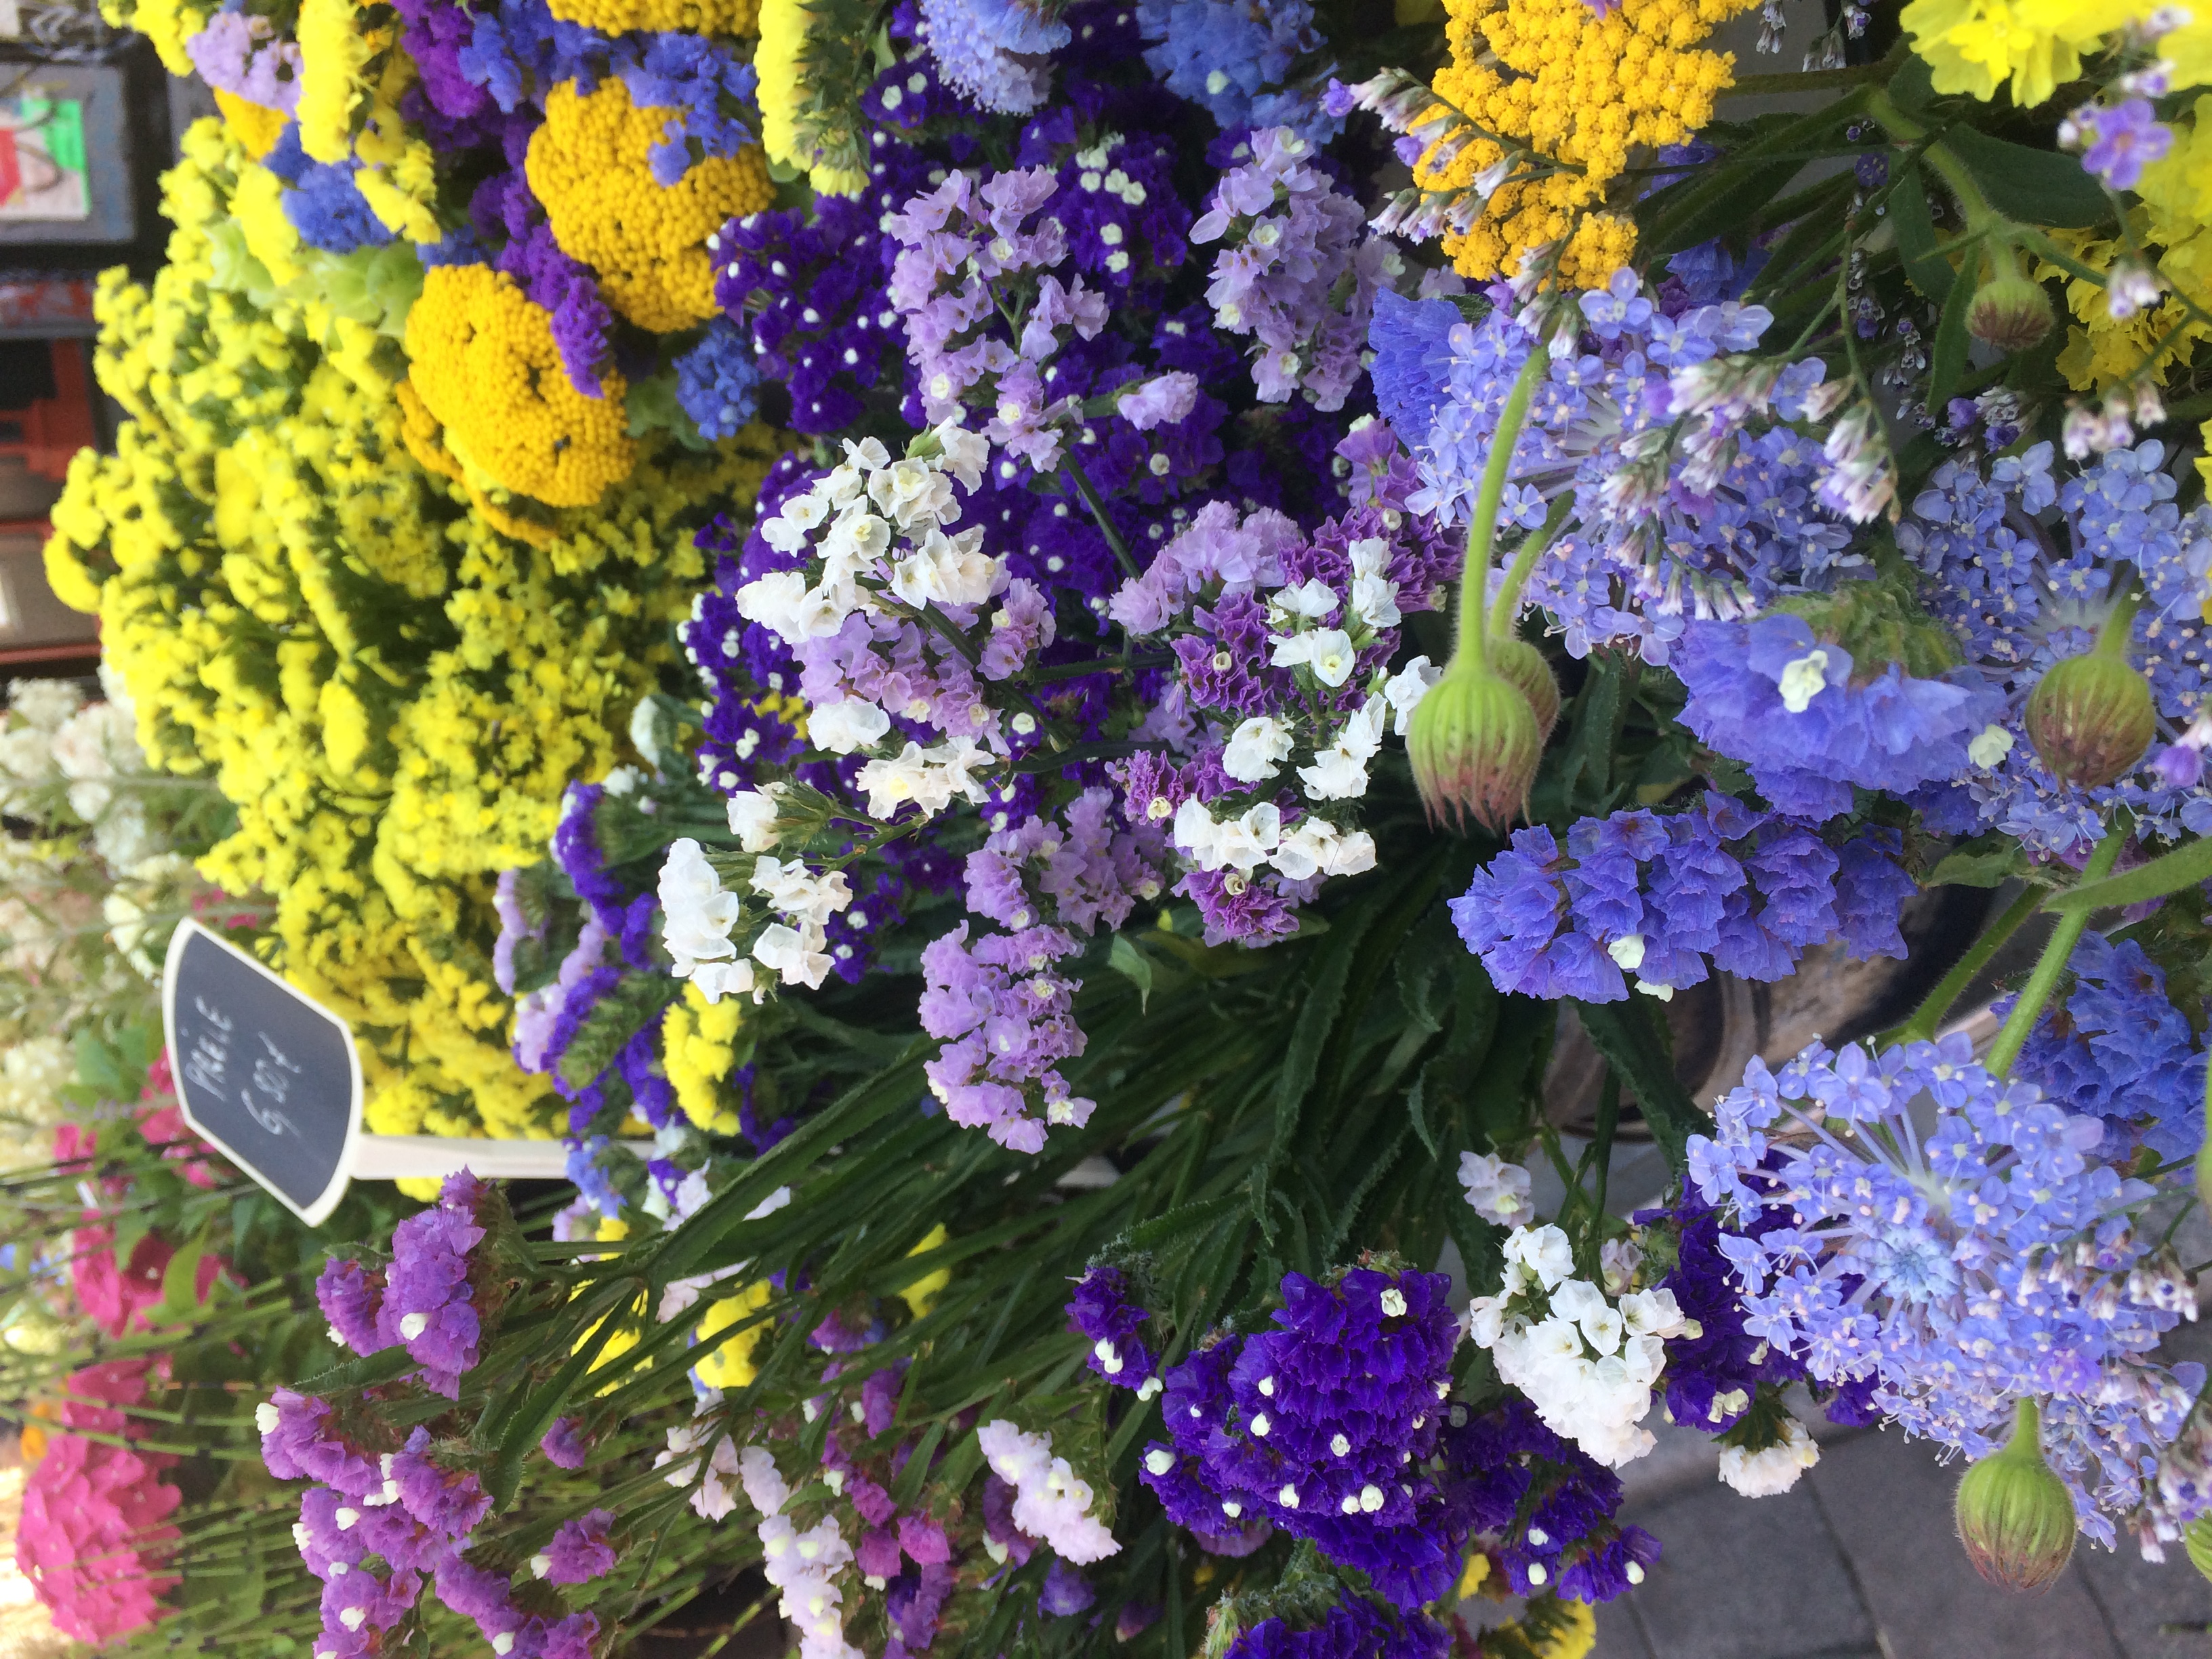 up close of flowers on sale at public market